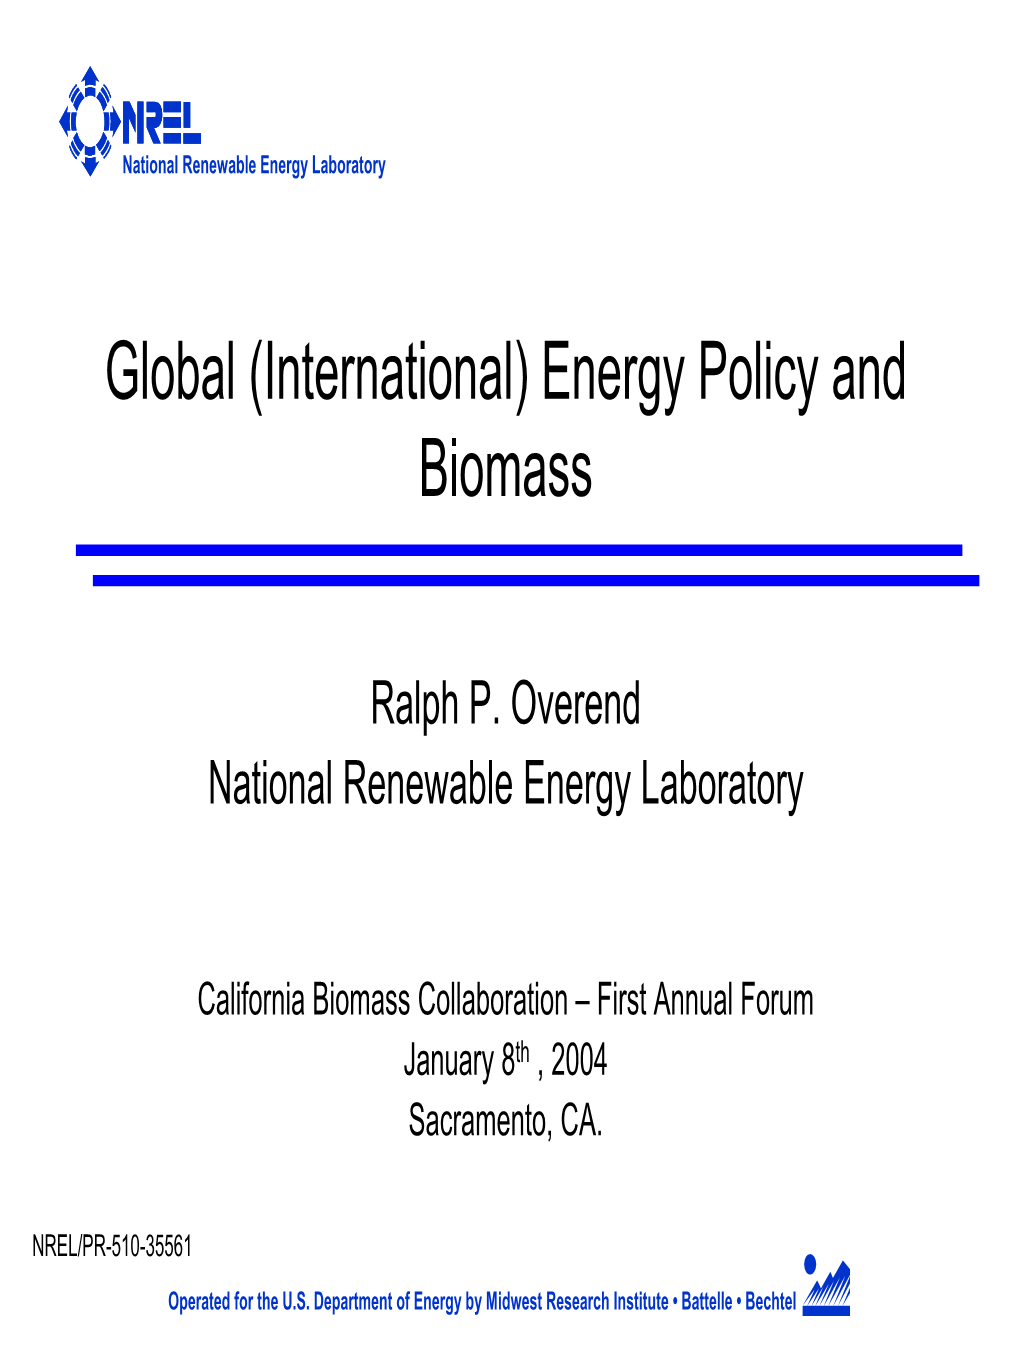 Energy Policy and Biomass